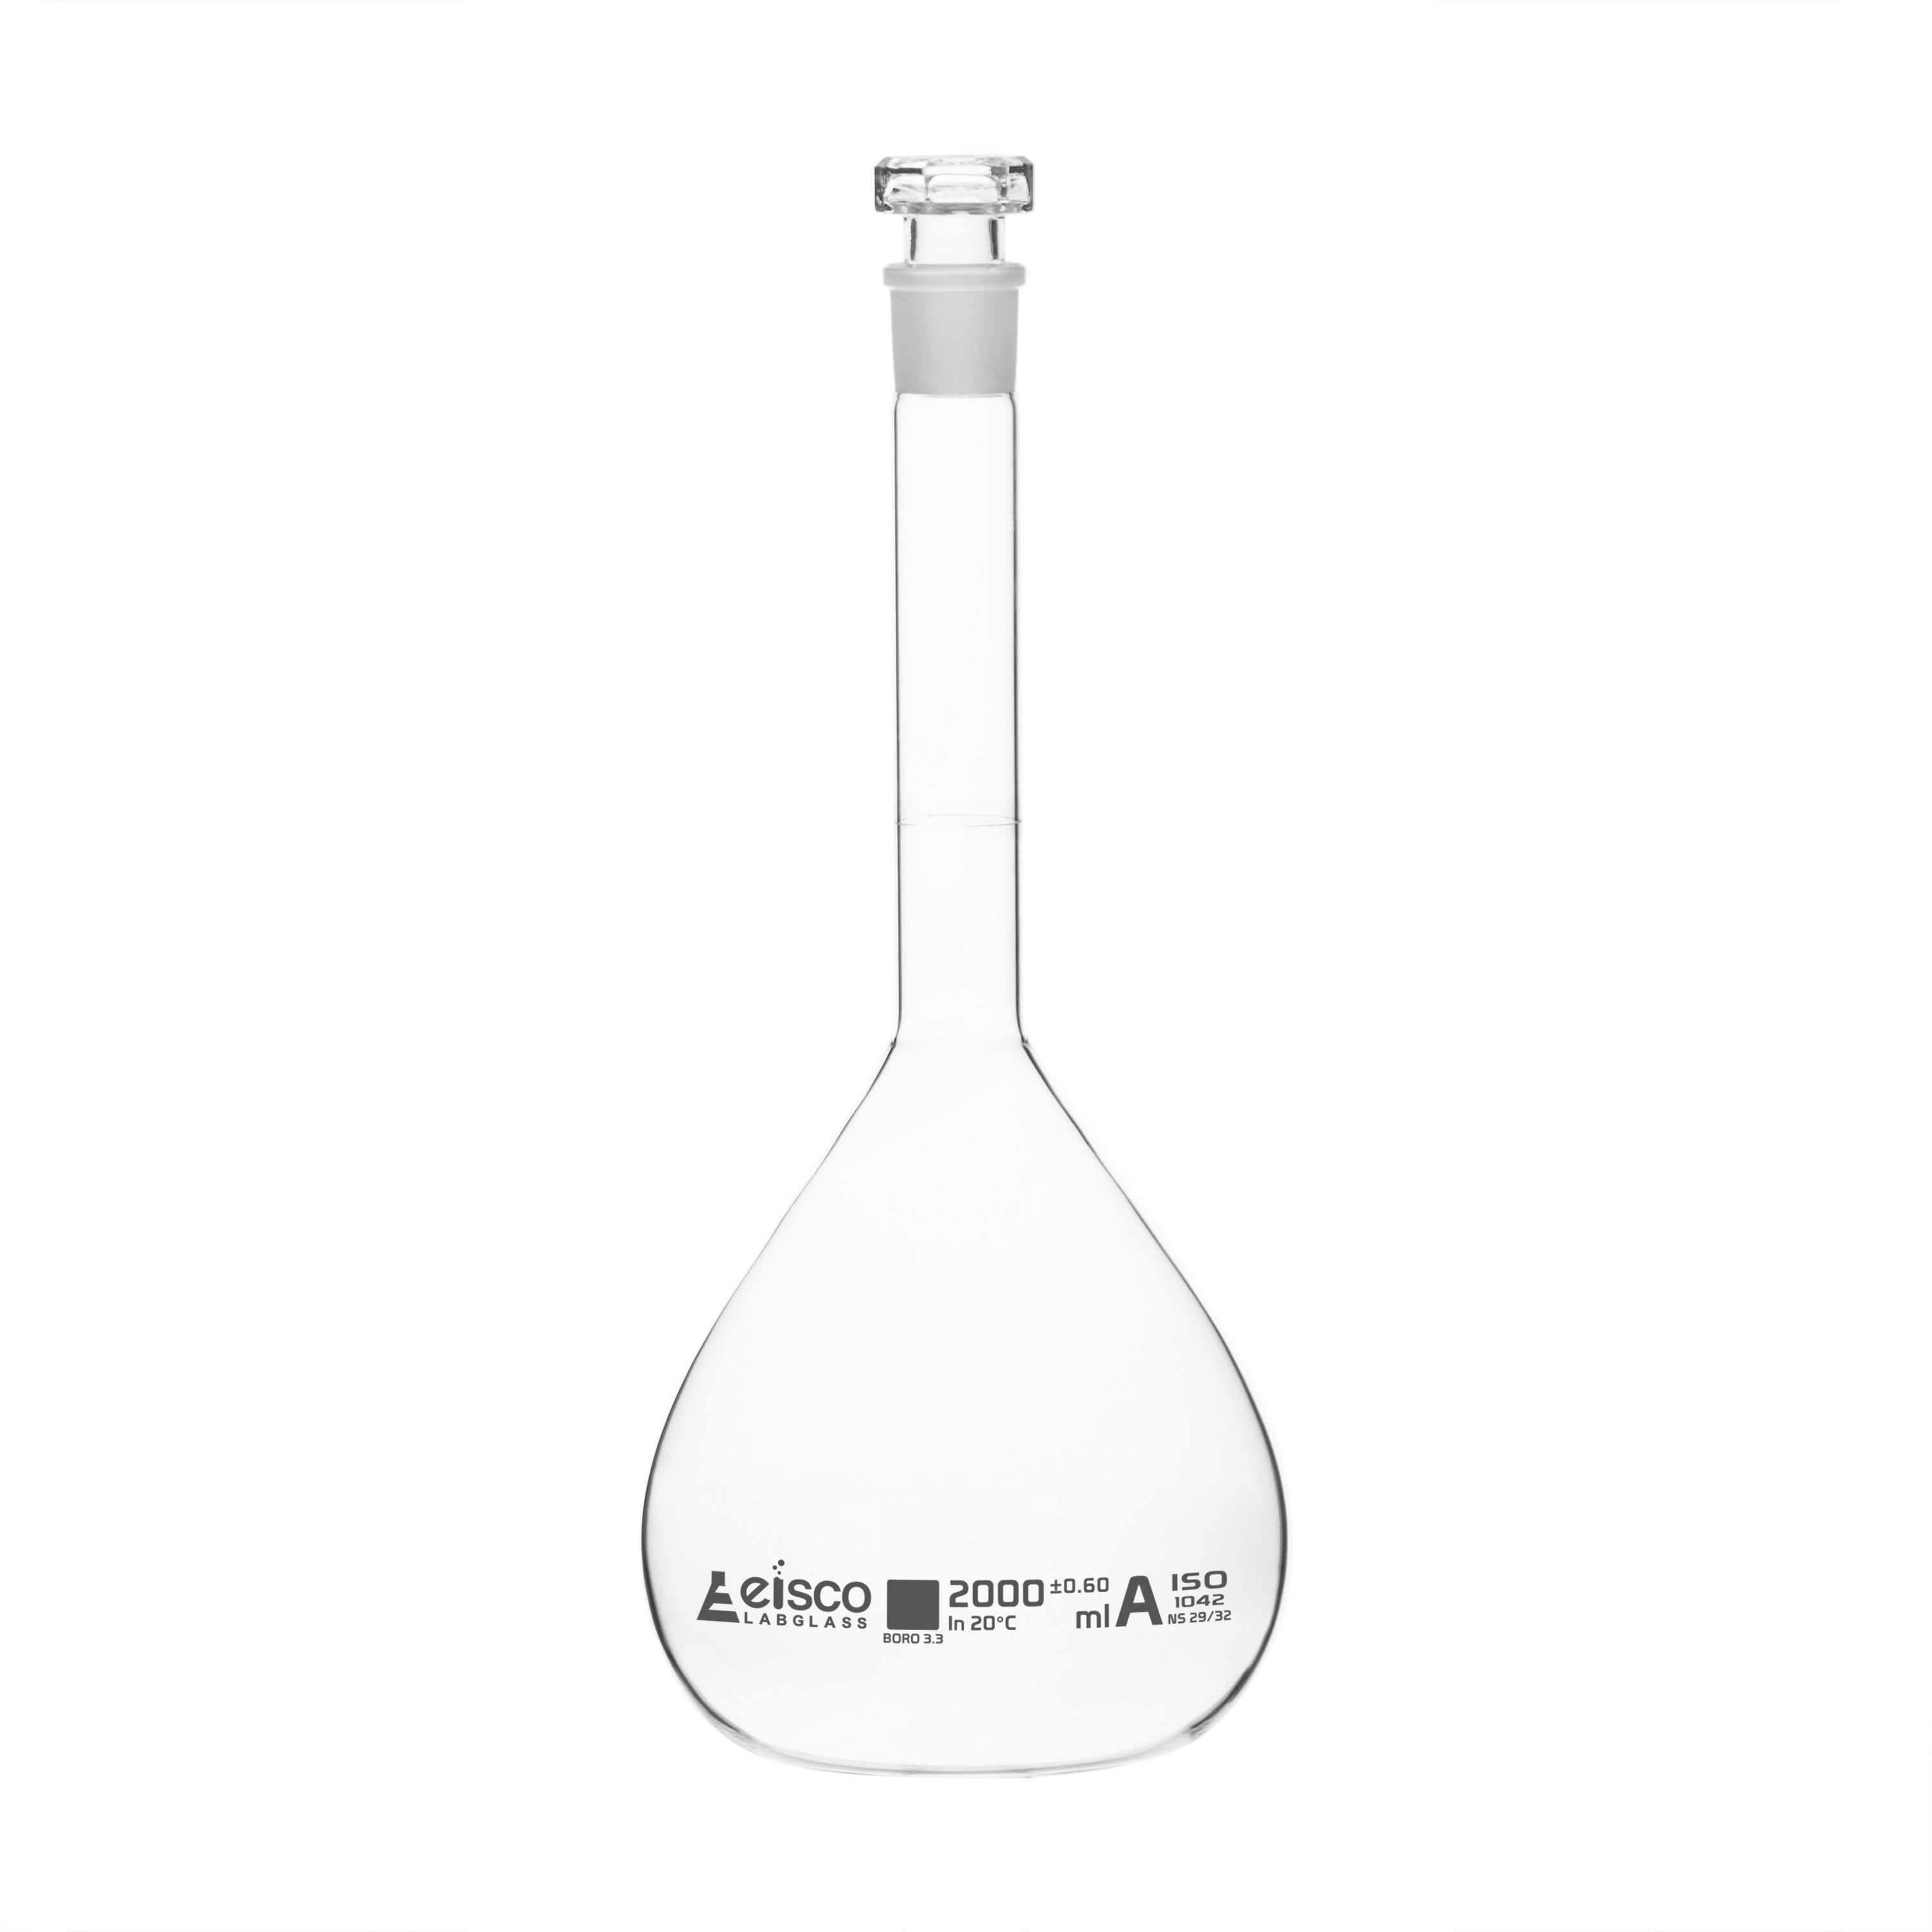 Borosilicate Volumetric Flask with Hollow Glass Stopper, 2000ml, Class A, White Print, Autoclavable